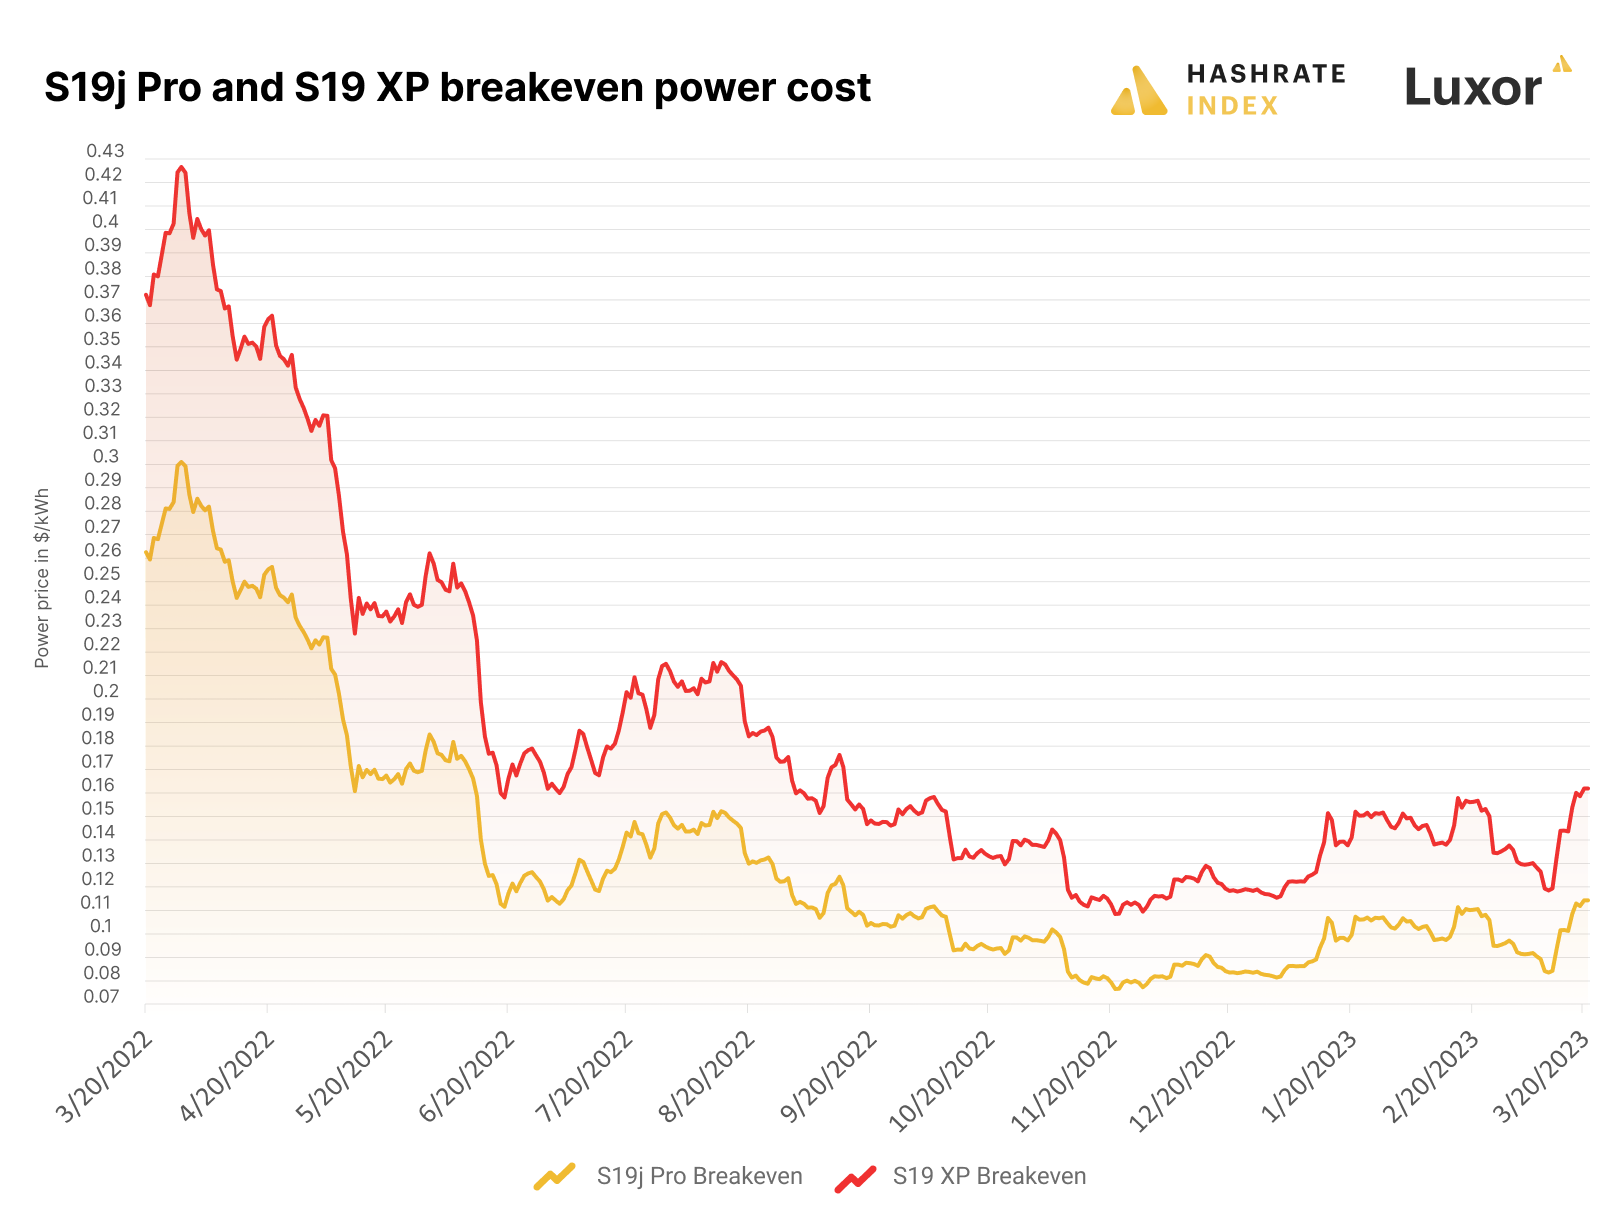 Breakeven power costs for S19j Pro and S19 XP (March 20, 2022 - March 20, 2023) | Source: Hashrate Index